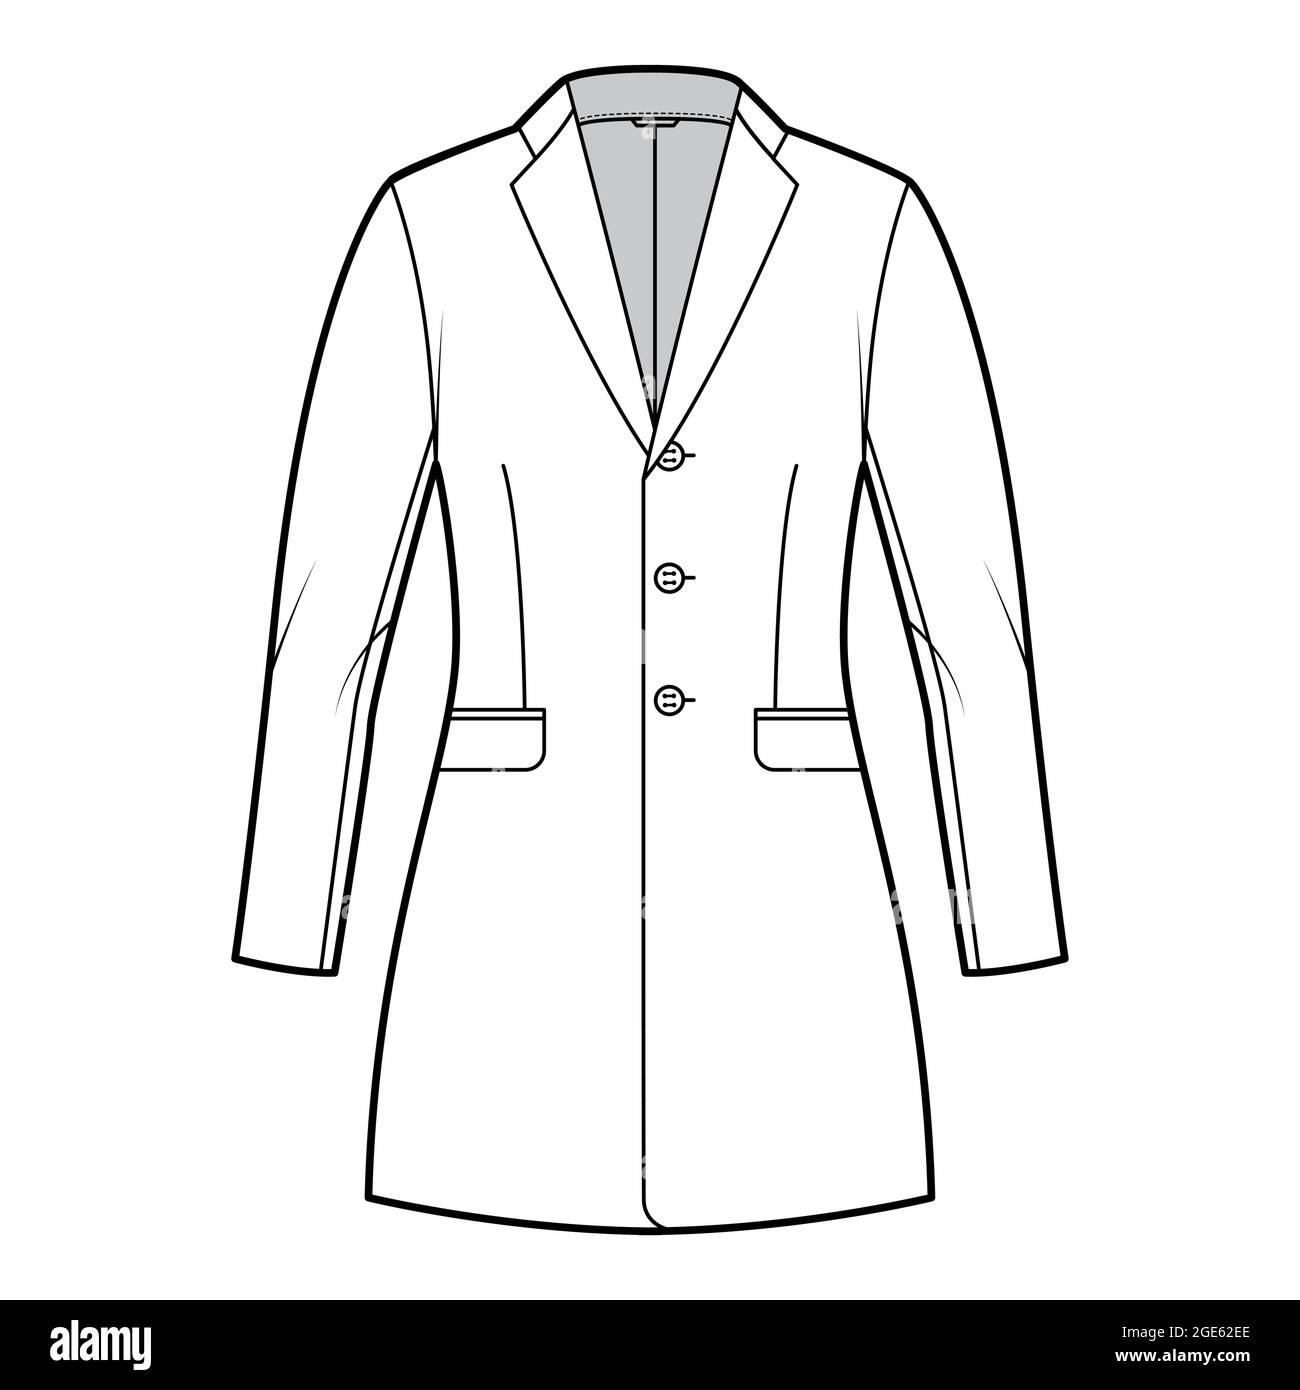 Jacket fitted Blazer structured suit technical fashion illustration with single breasted, long sleeves, flap pockets, fingertip length. Flat coat template front, white color style. Women, men CAD Stock Vector